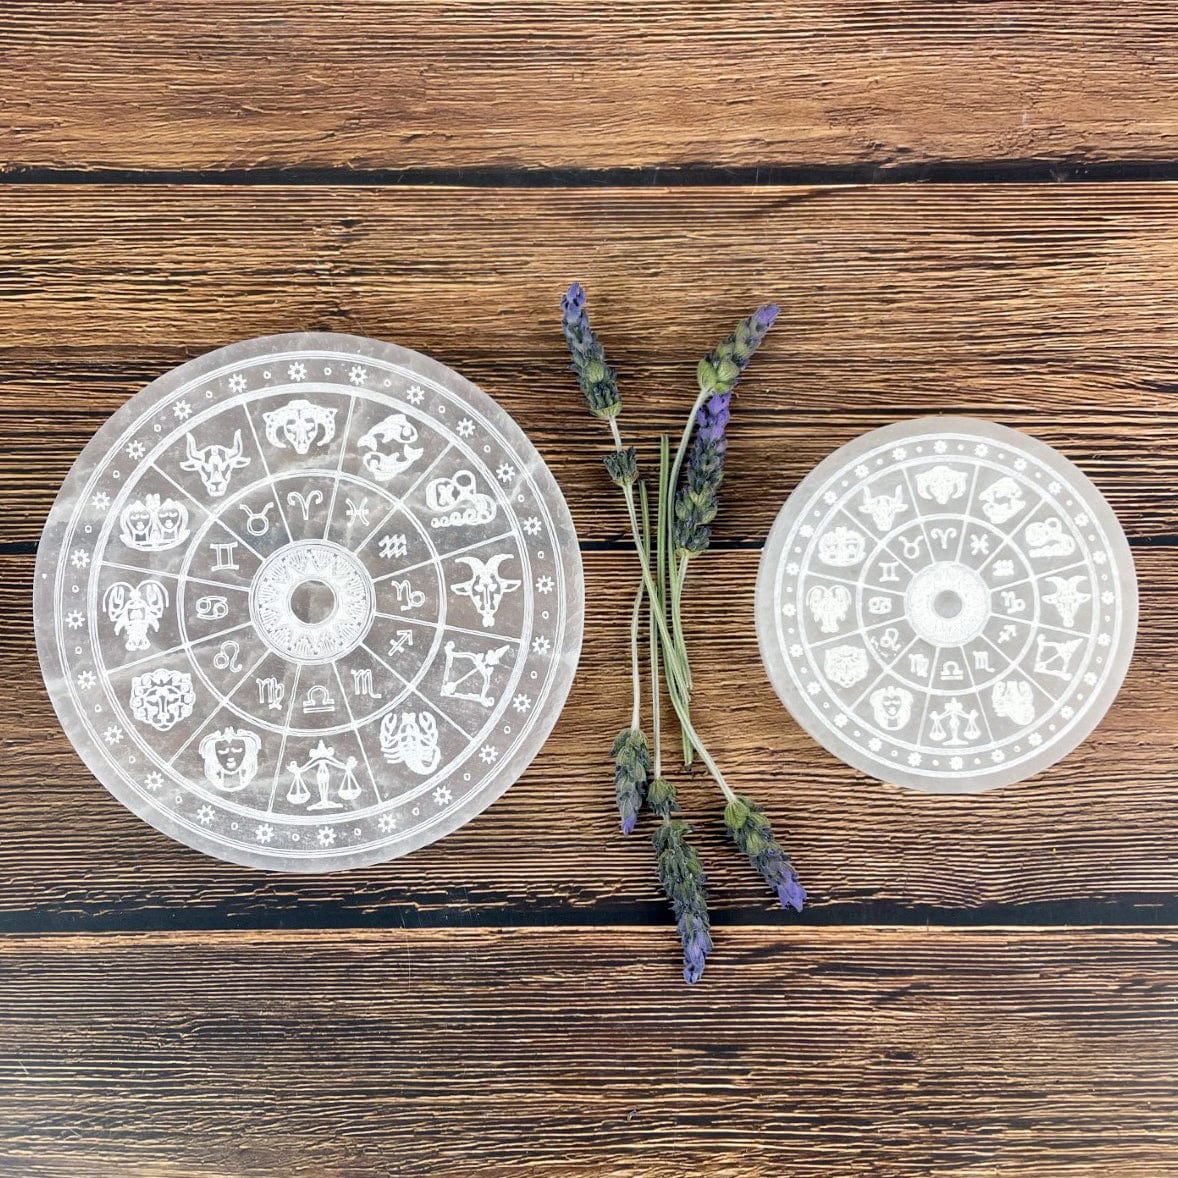 14cm and 10cm selenite zodiac engraved charging plates on display for size comparison 